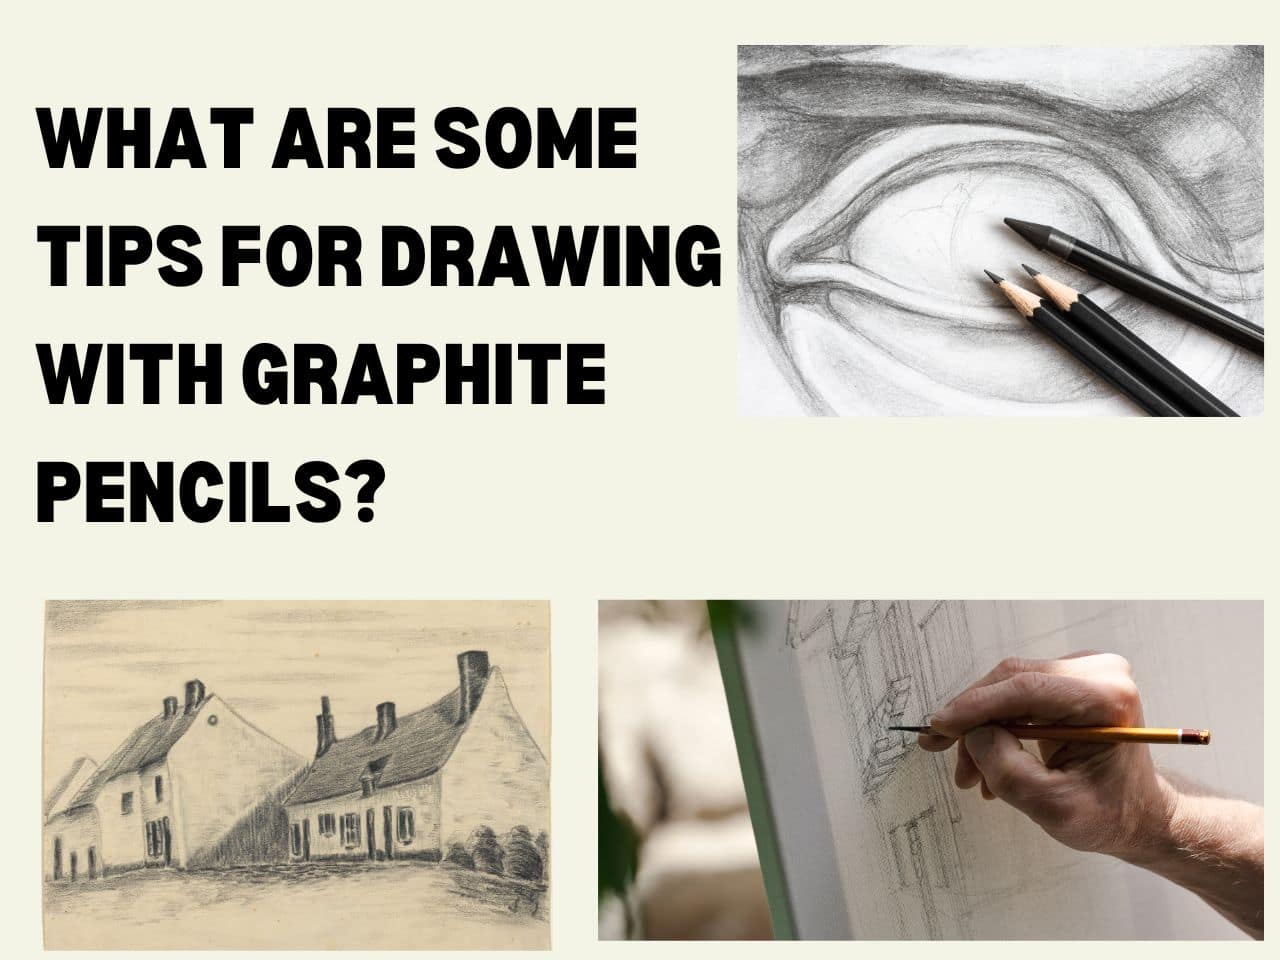 What are Some Tips for Drawing with Graphite Pencils?